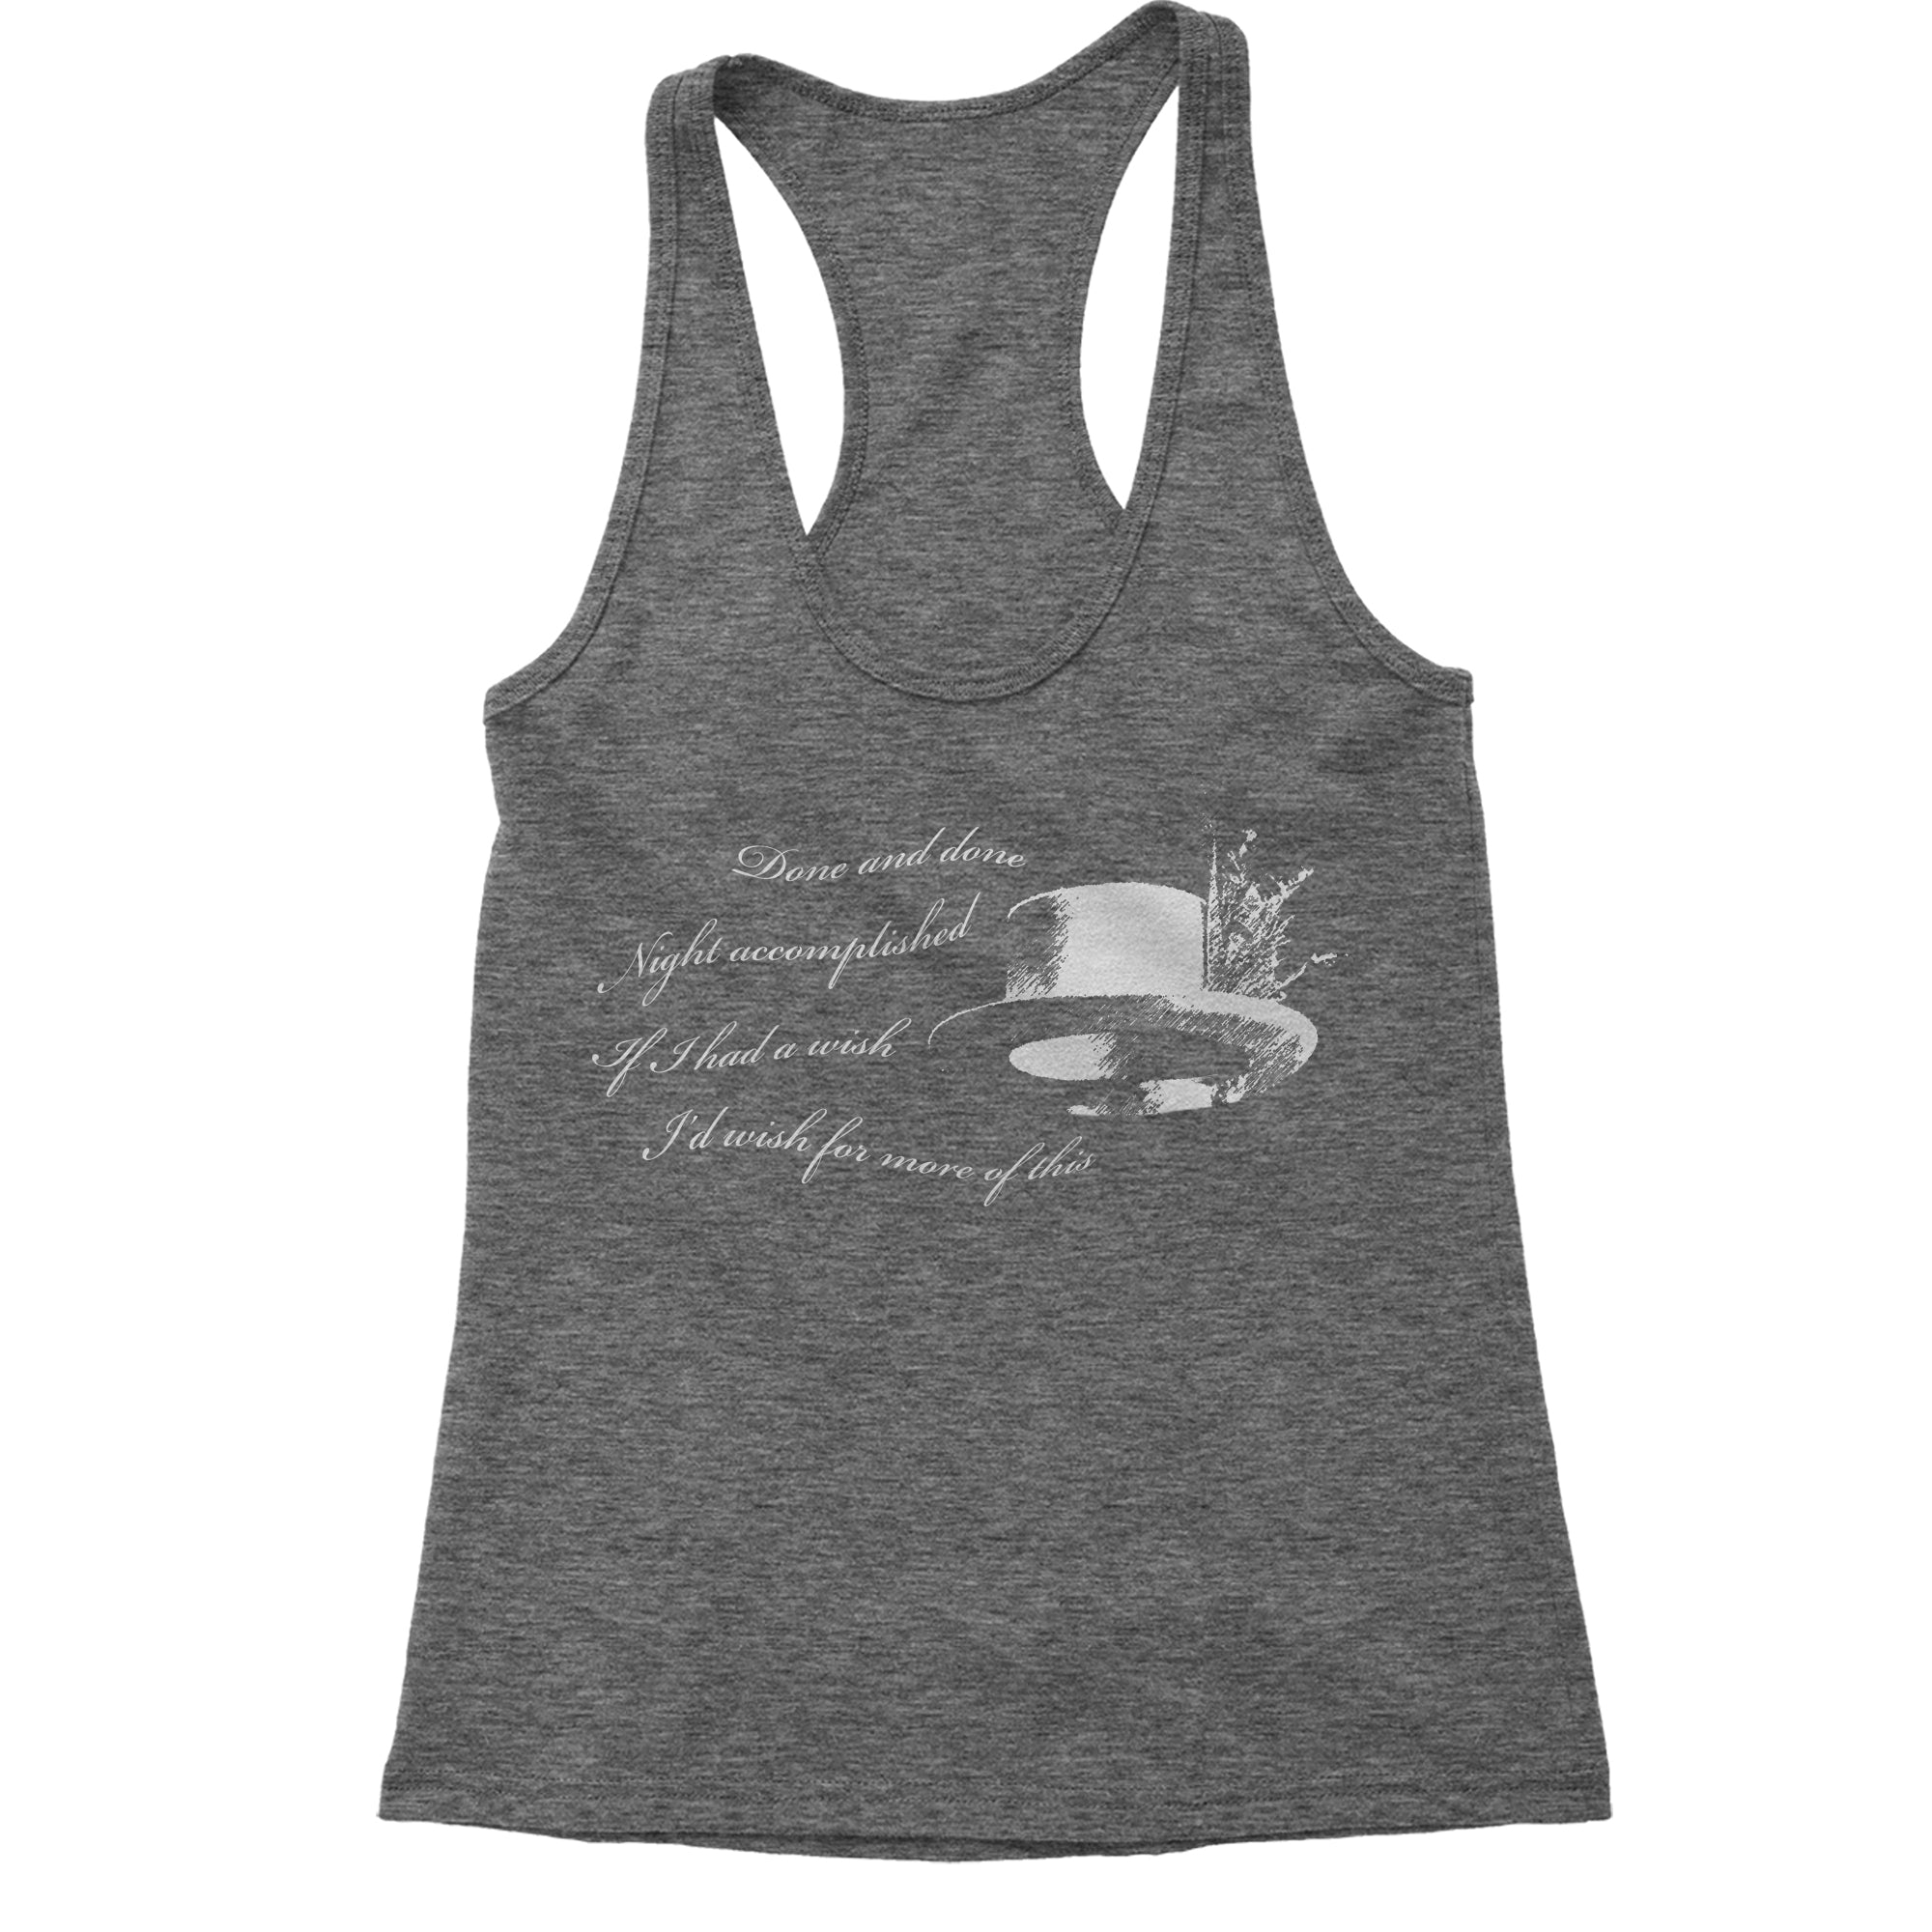 Done and Done Women's Racerback Tank